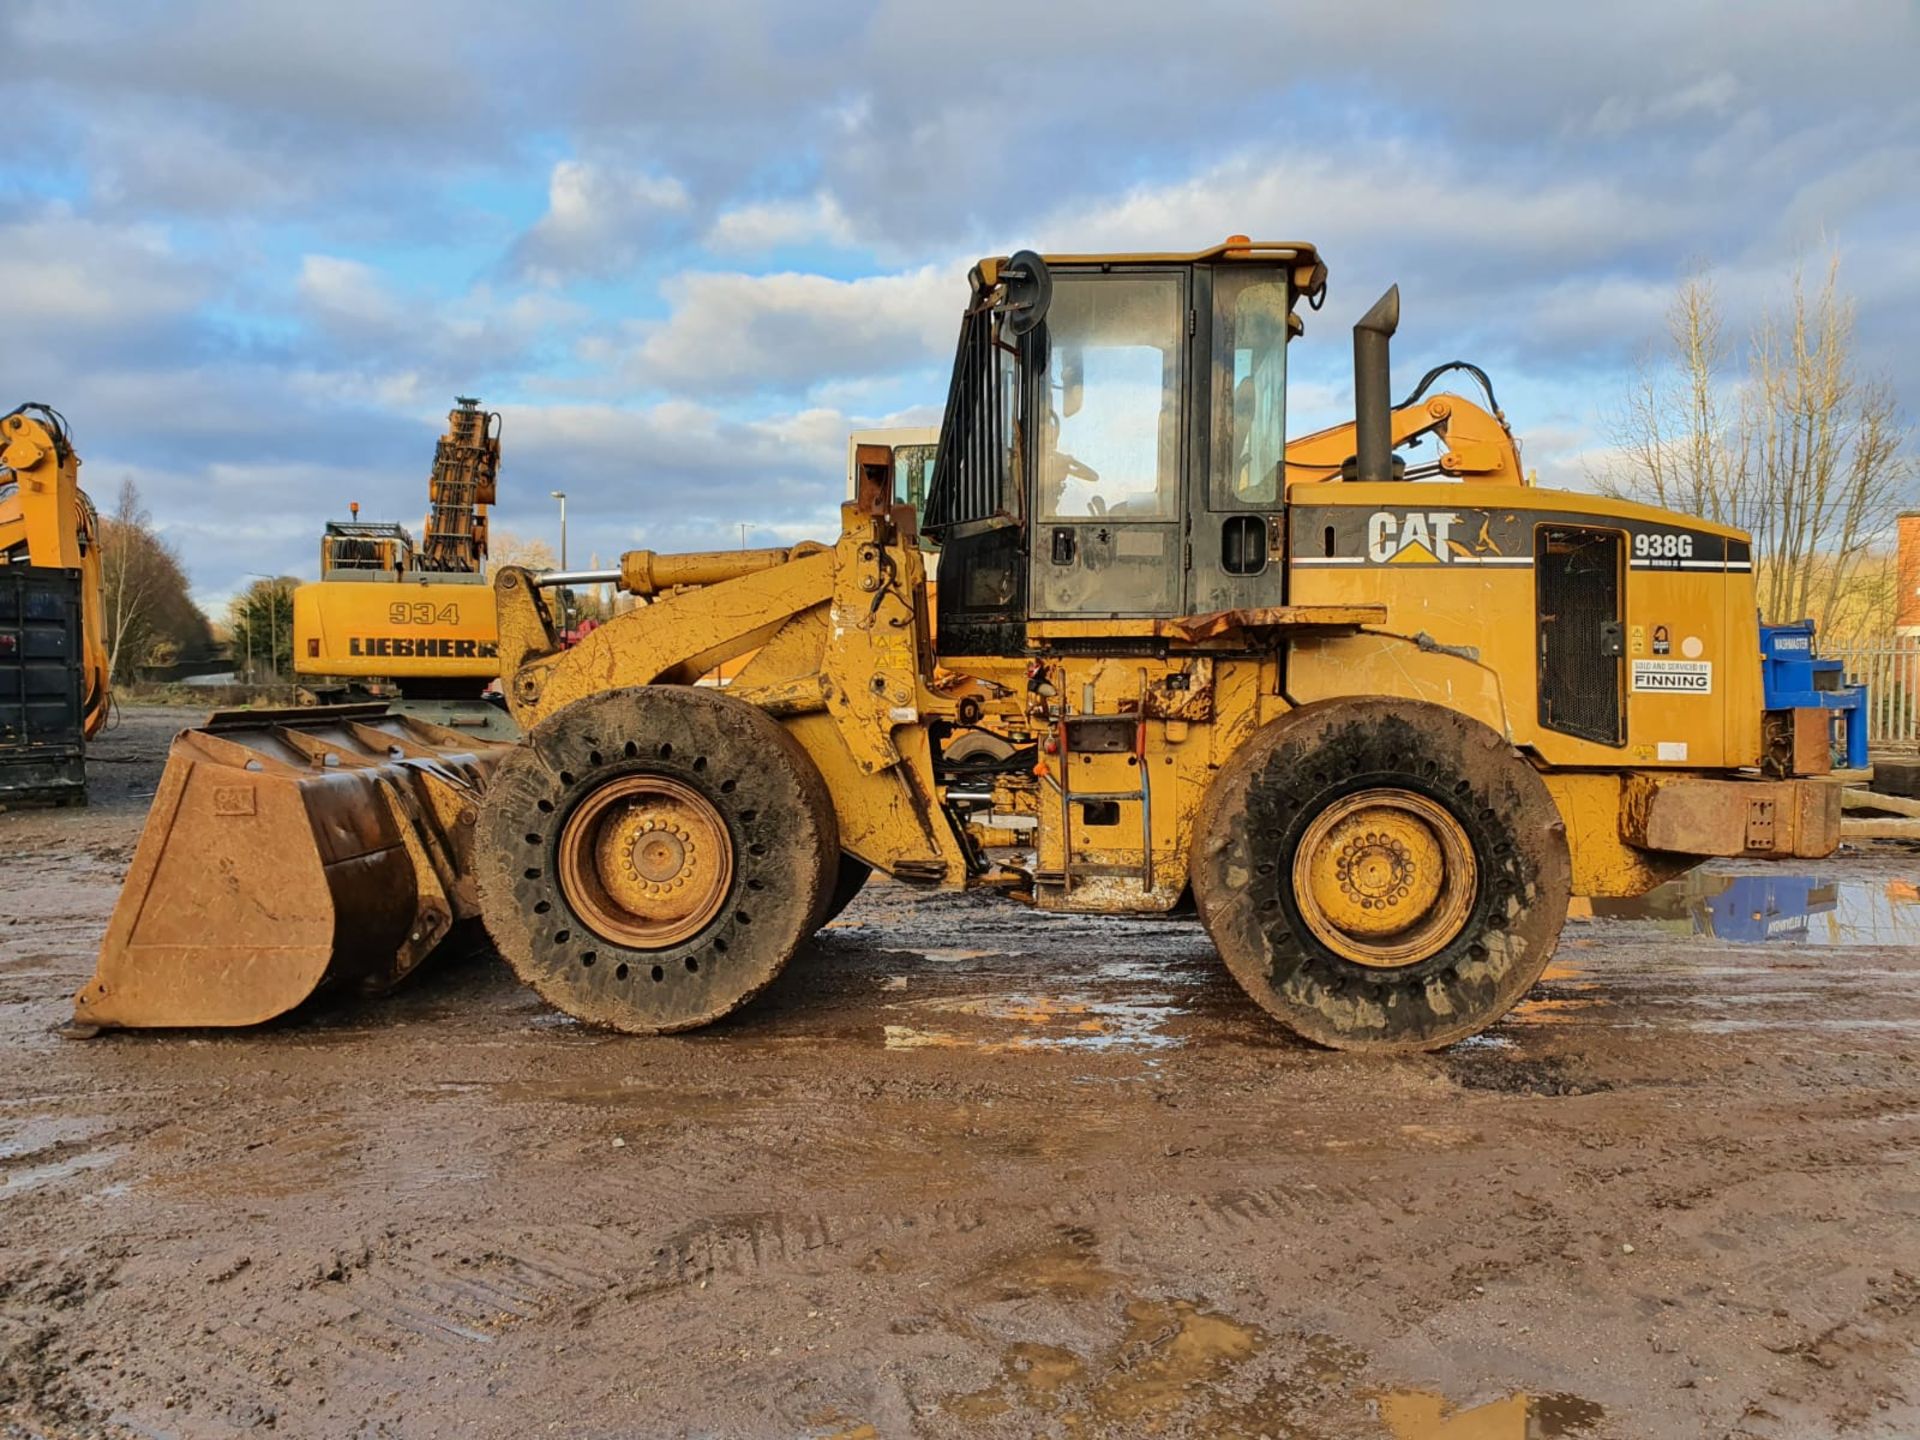 Caterpillar 938G Loading Shovel, 2005 and works well Appraisal: Model/Serial No: Hours/Miles: